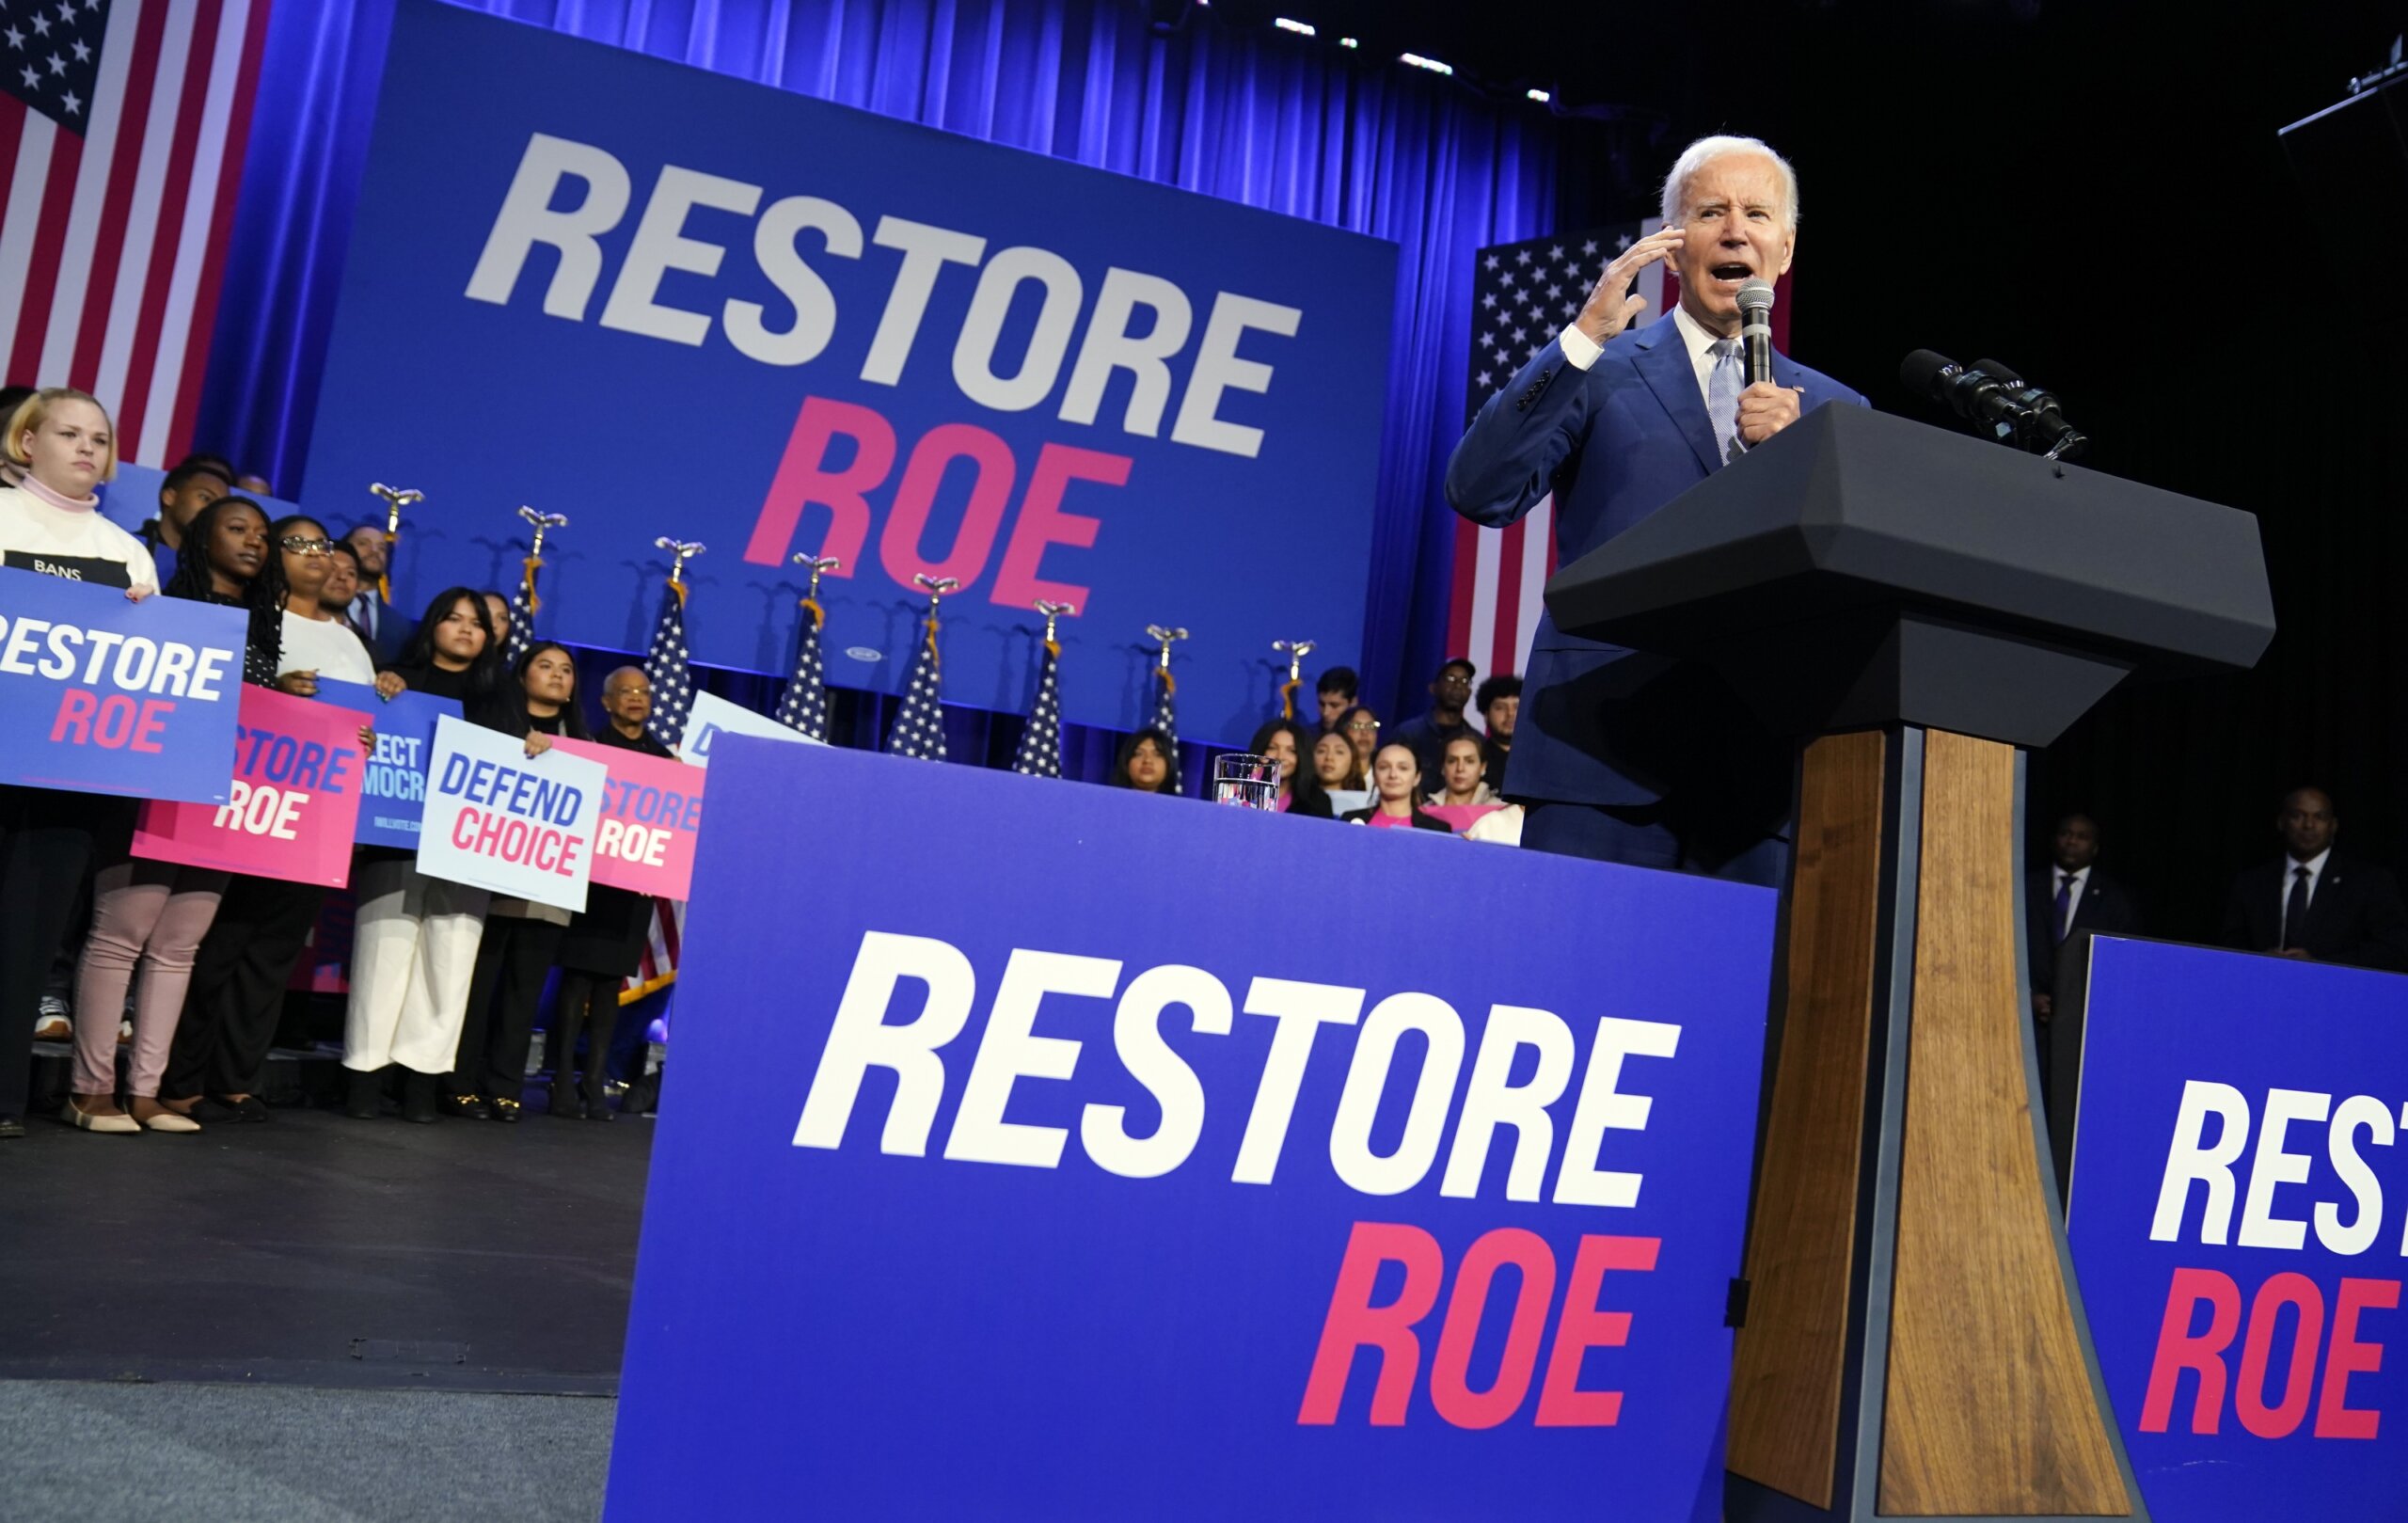 As Biden rallies for abortion rights, conservatives a mile away are